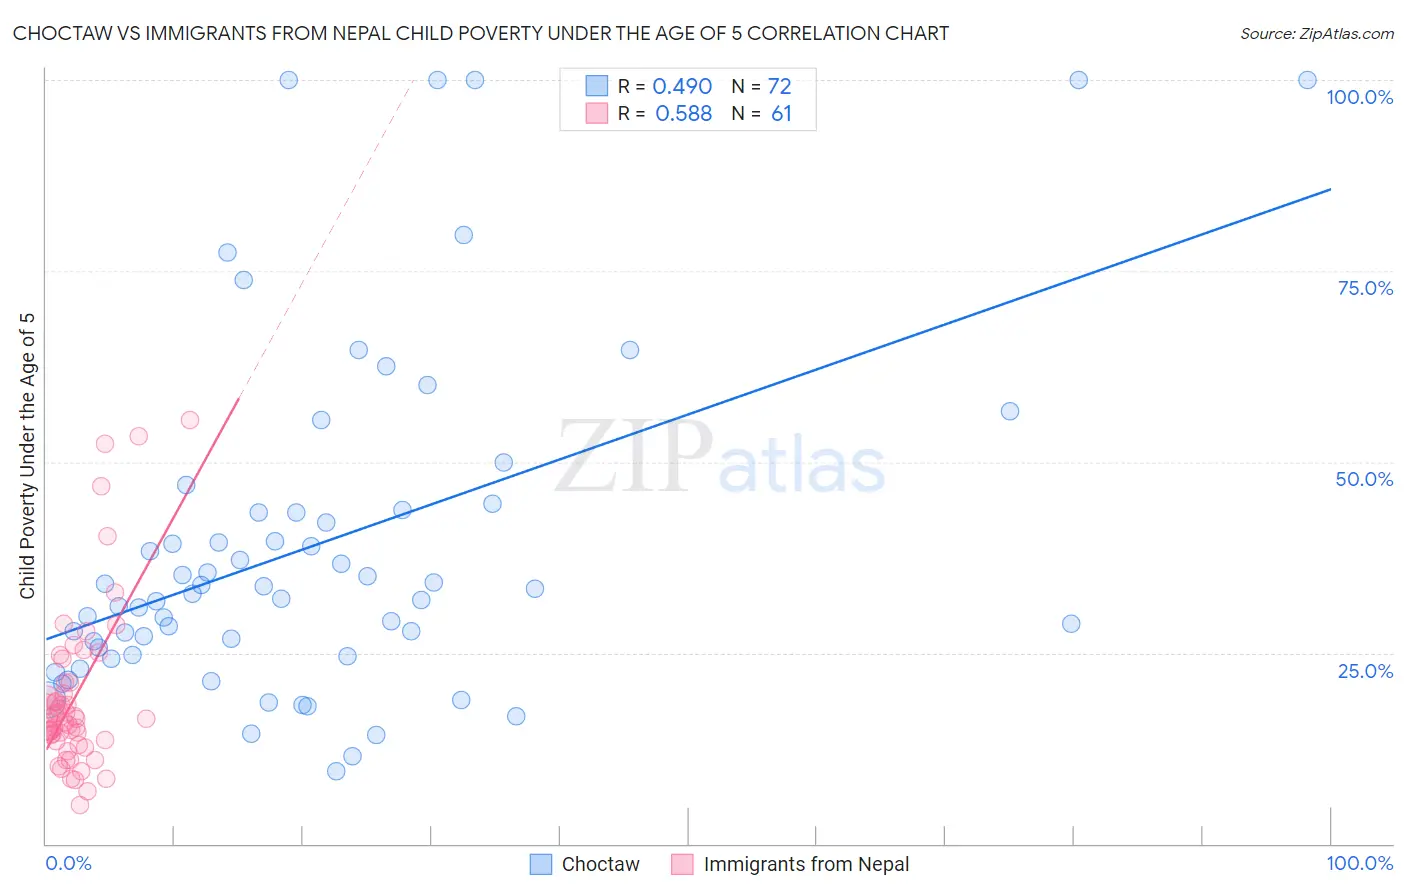 Choctaw vs Immigrants from Nepal Child Poverty Under the Age of 5